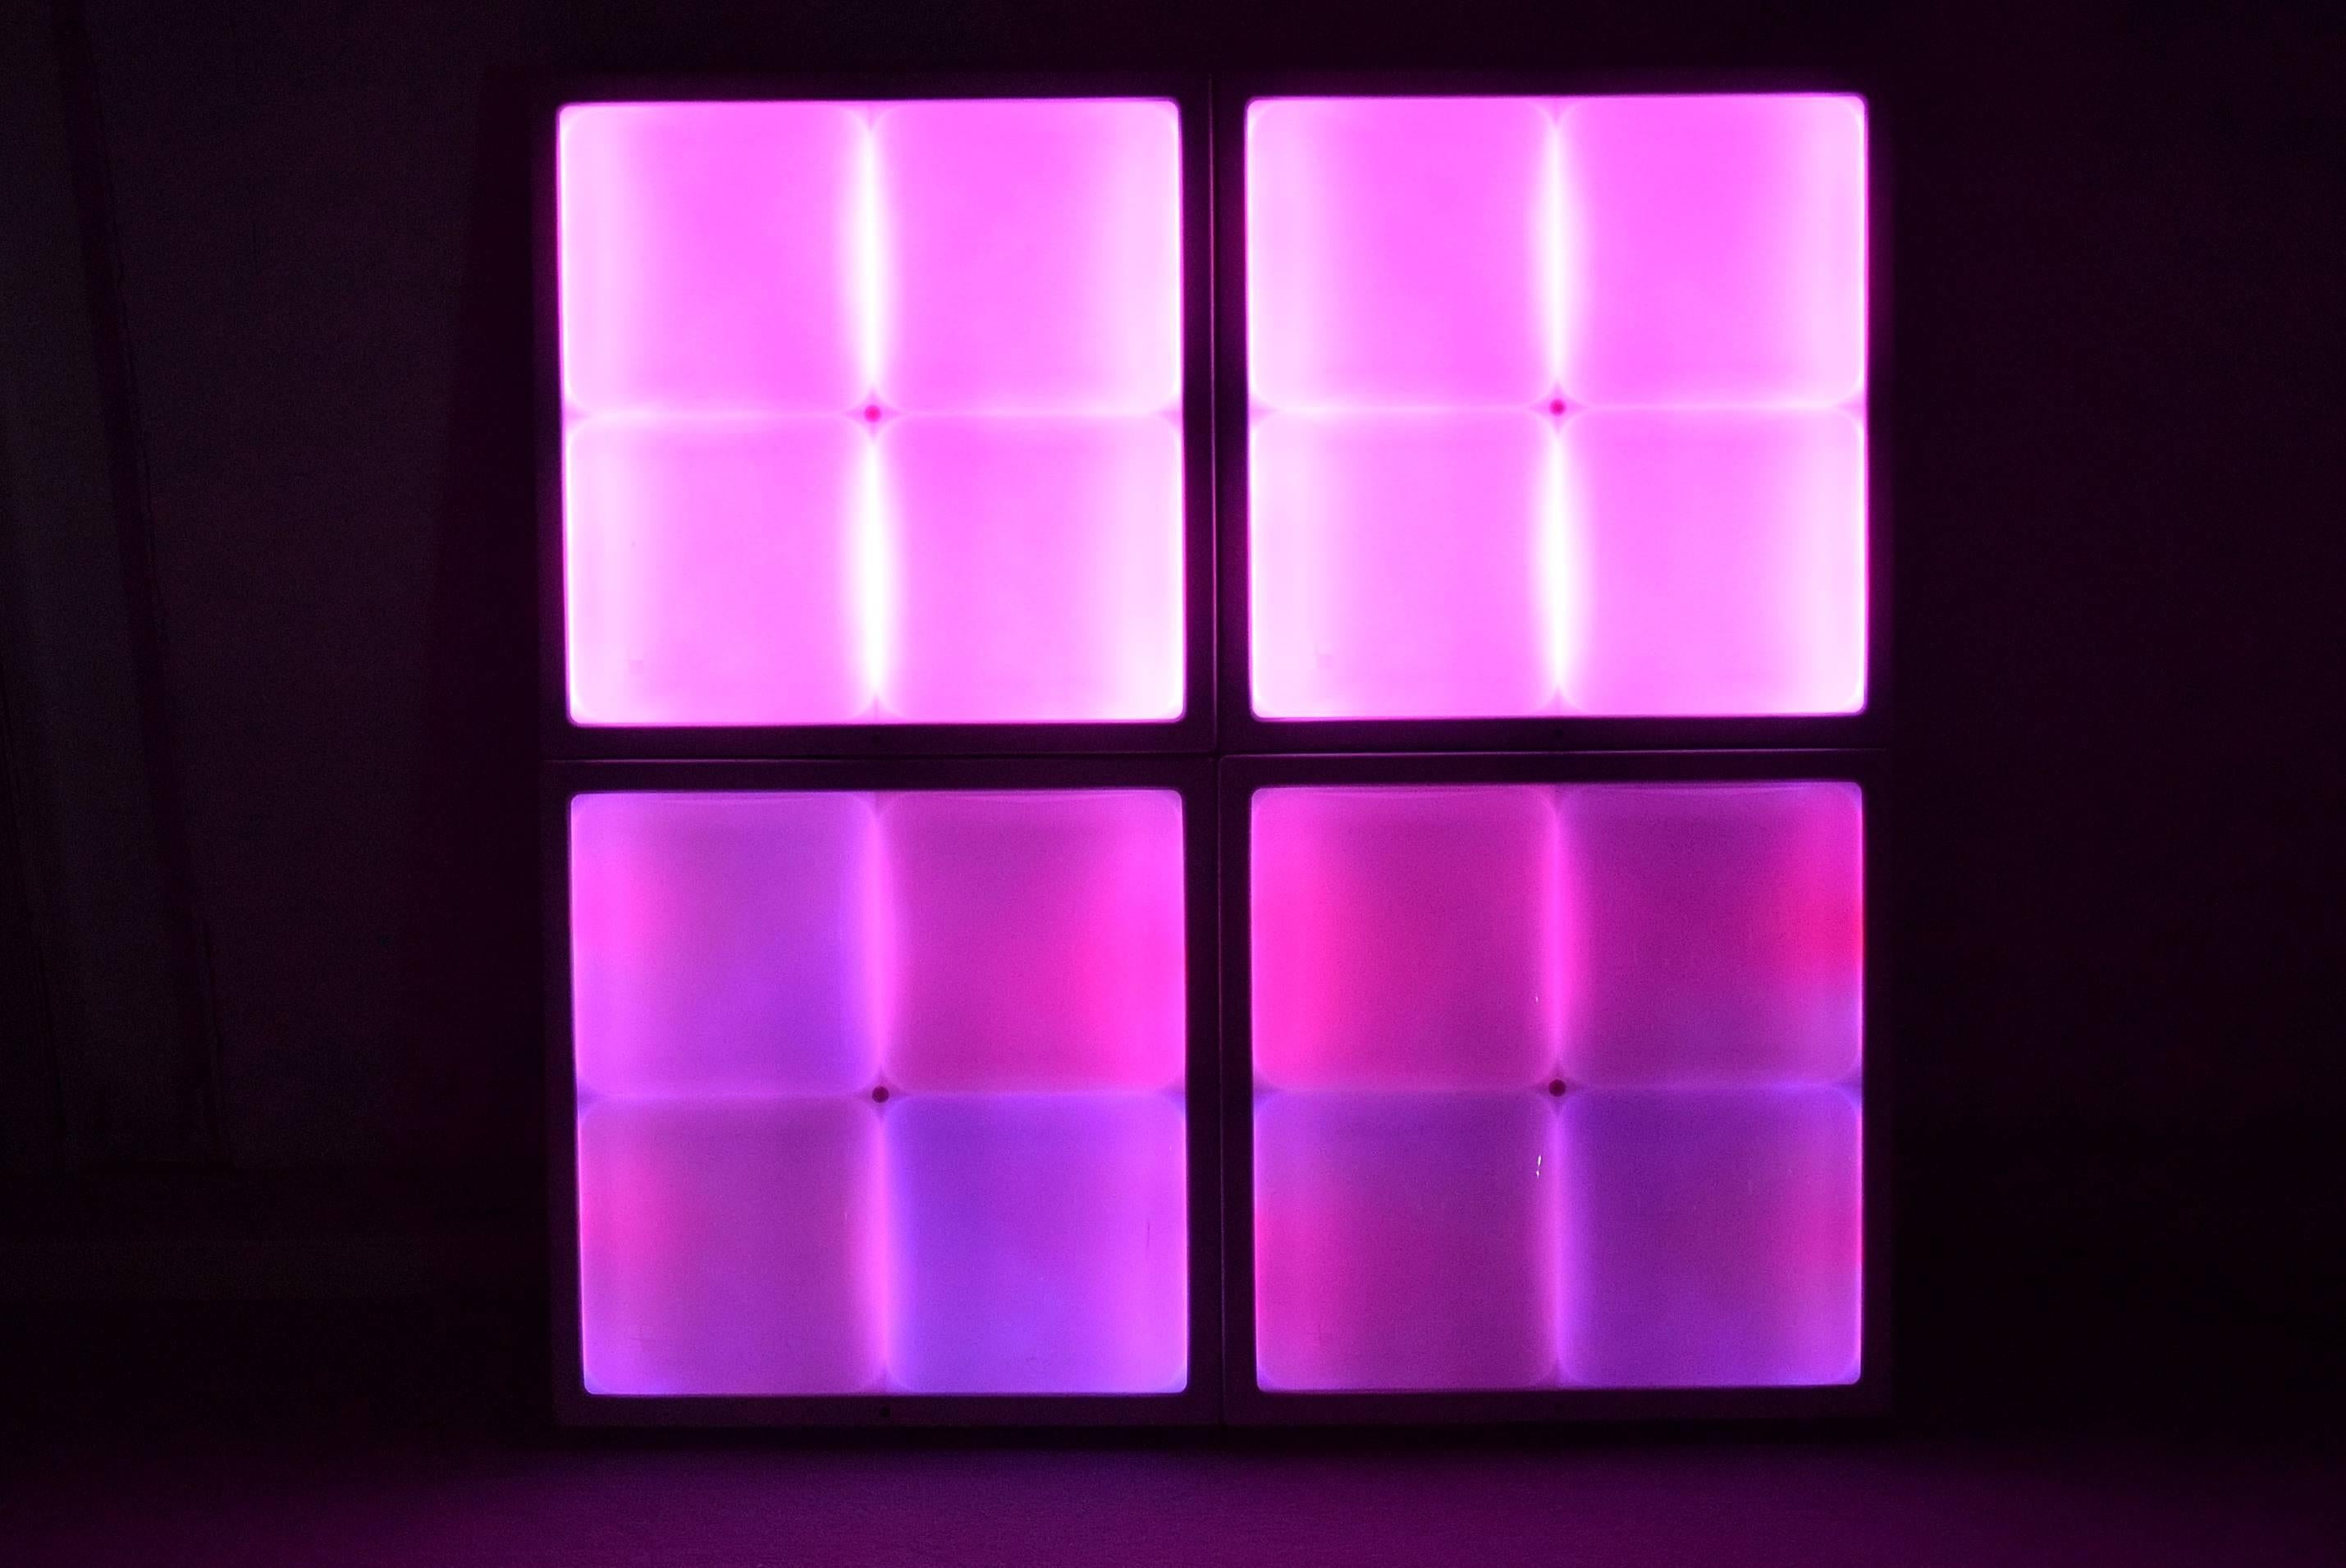 Mood light, 1990.

The mood light is an innovative medium which allows you to control different light scenarios with unique style. Utilizing a IR remote control, you have the possibility to compose your own light moods and changing color